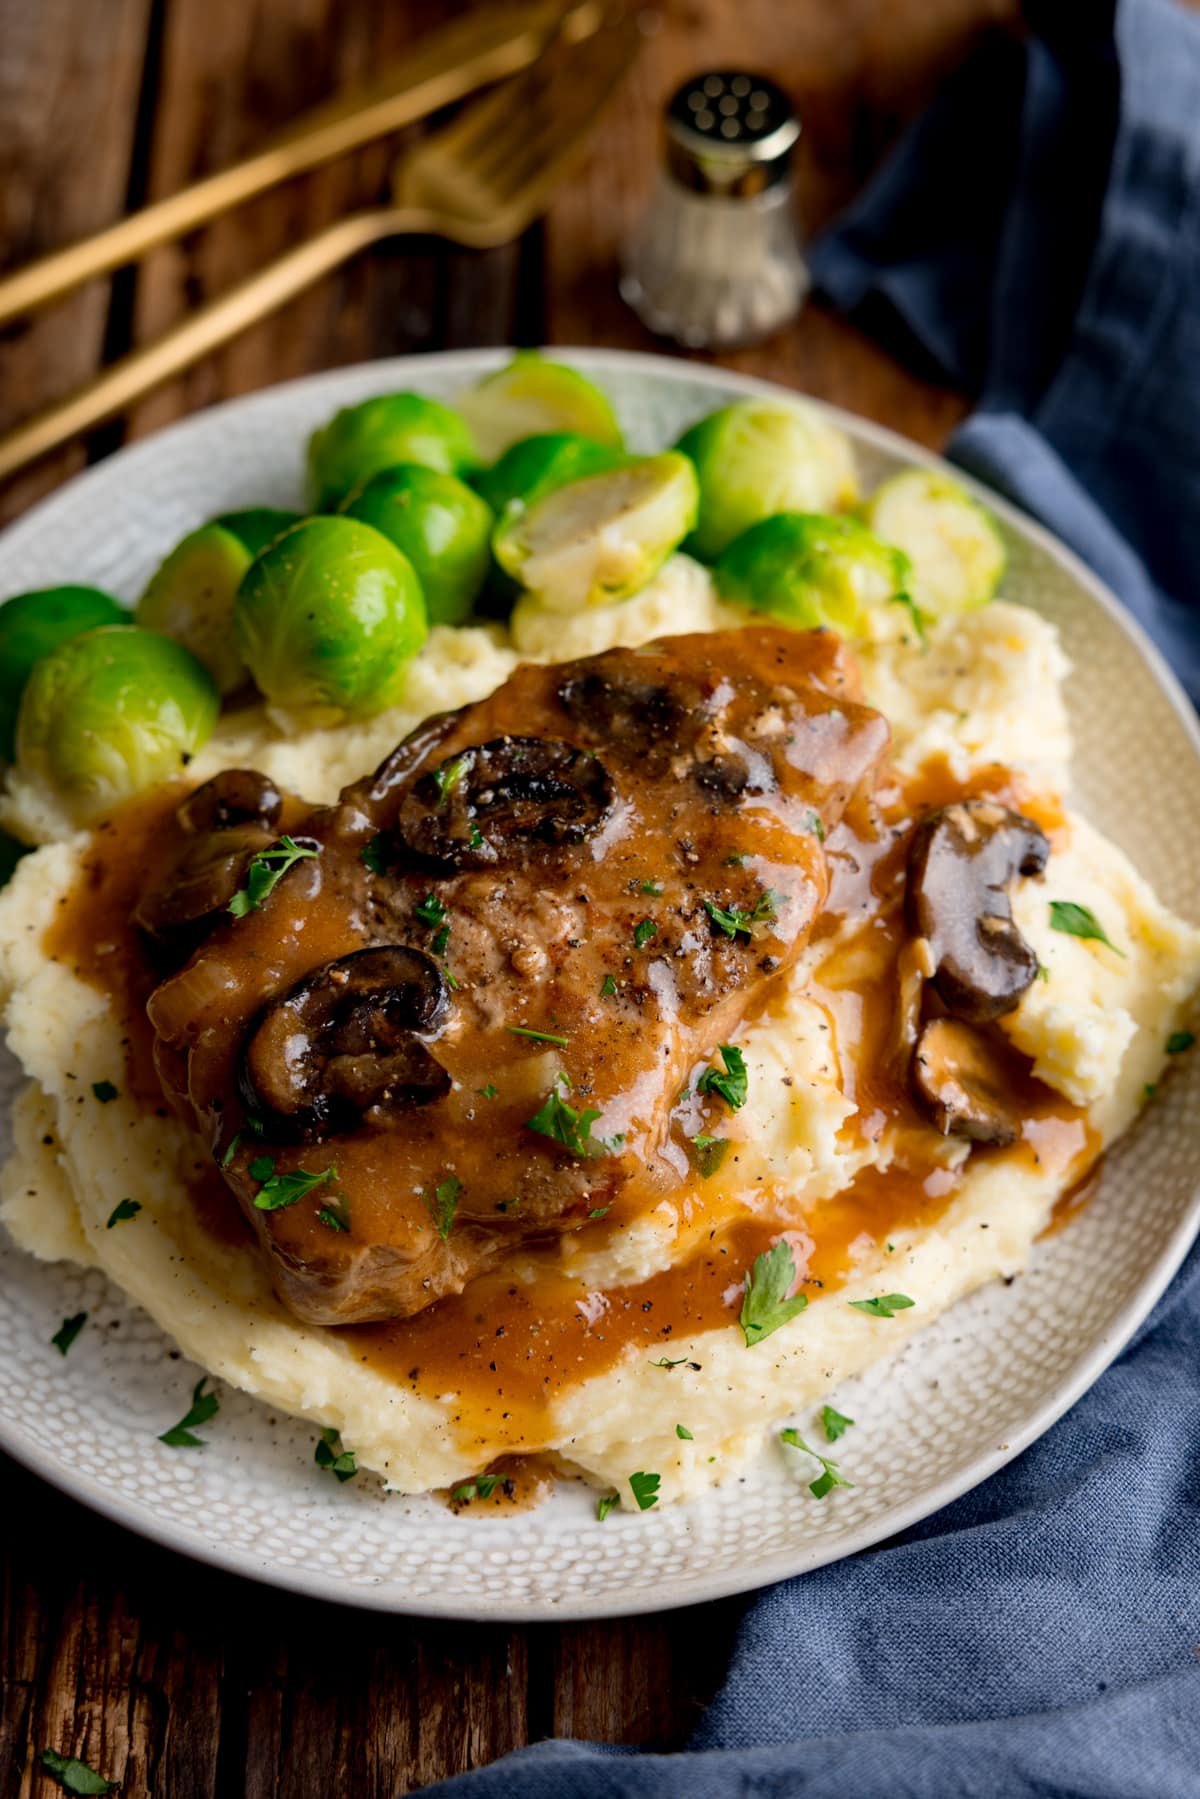 Slow cooker smothered pork chop with gravy and mushrooms on top of a pile of mashed potato, next to sprouts on a white plate. The plate is on a wooden background next to a blue napkin. There is gold cutlery and a small salt shaker at the top of the image.